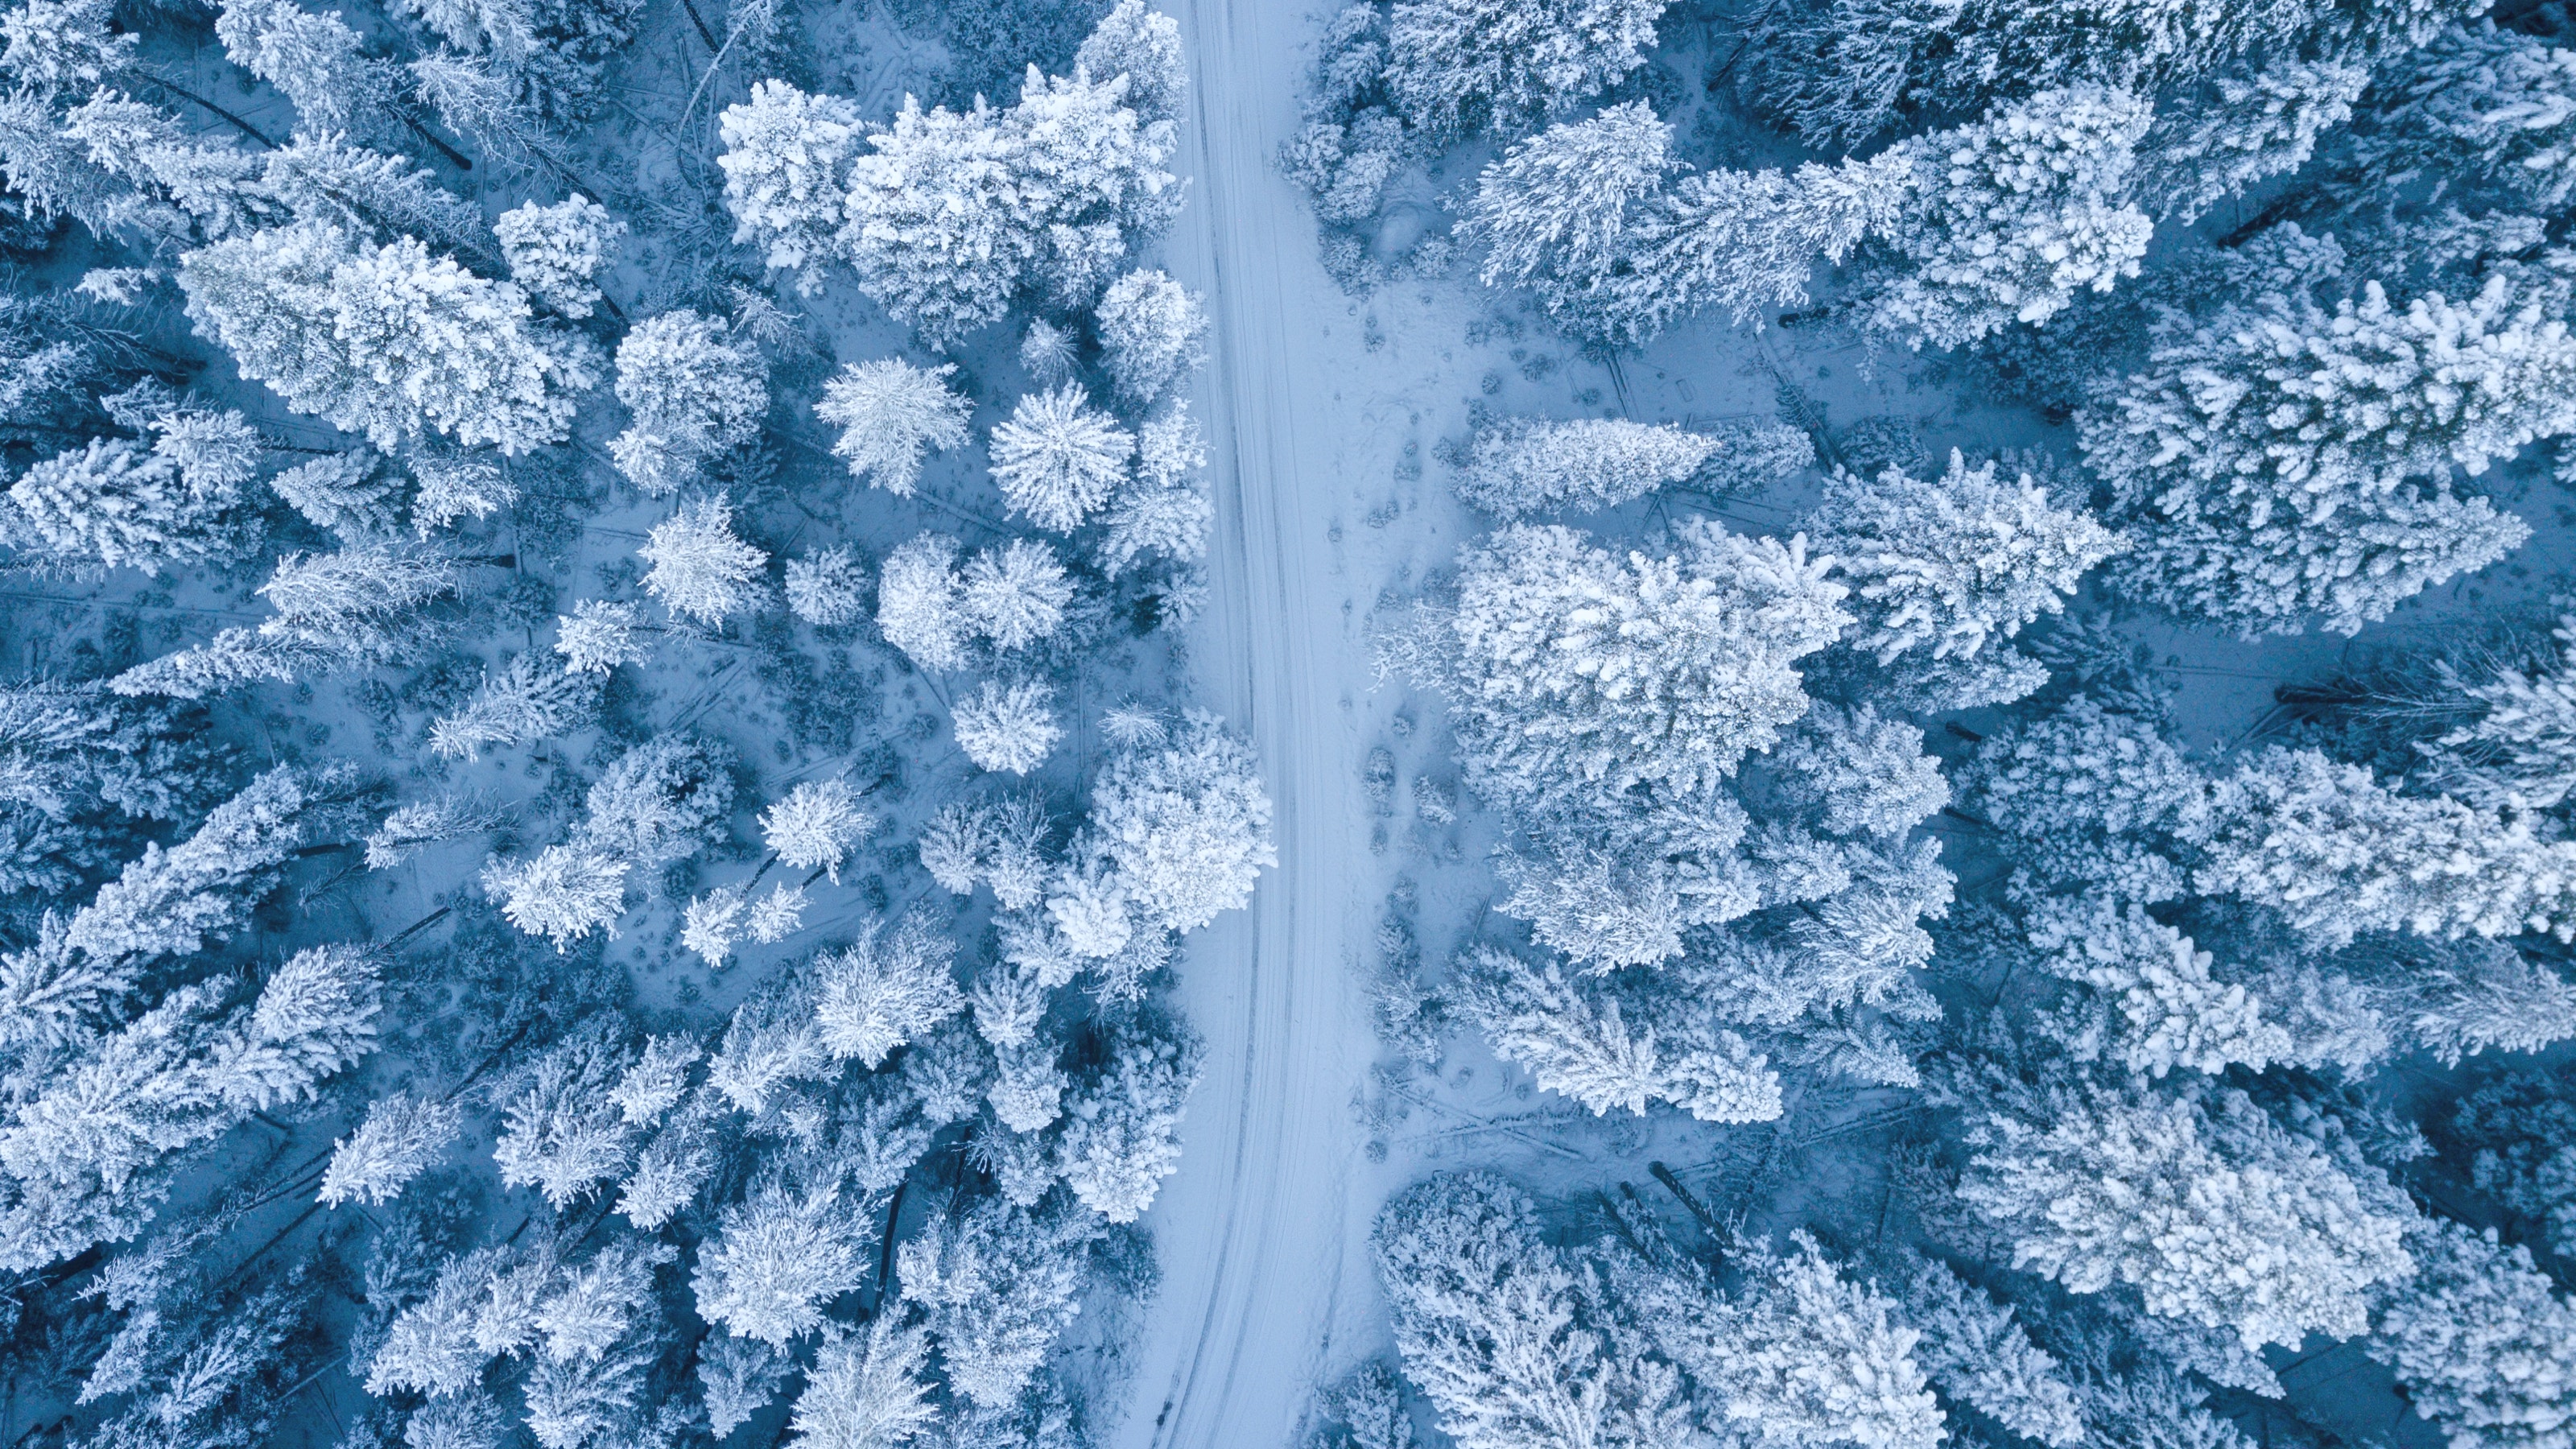 Photo by Ruvim Miksanskiy: https://www.pexels.com/photo/aerial-photography-of-snow-covered-trees-1438761/